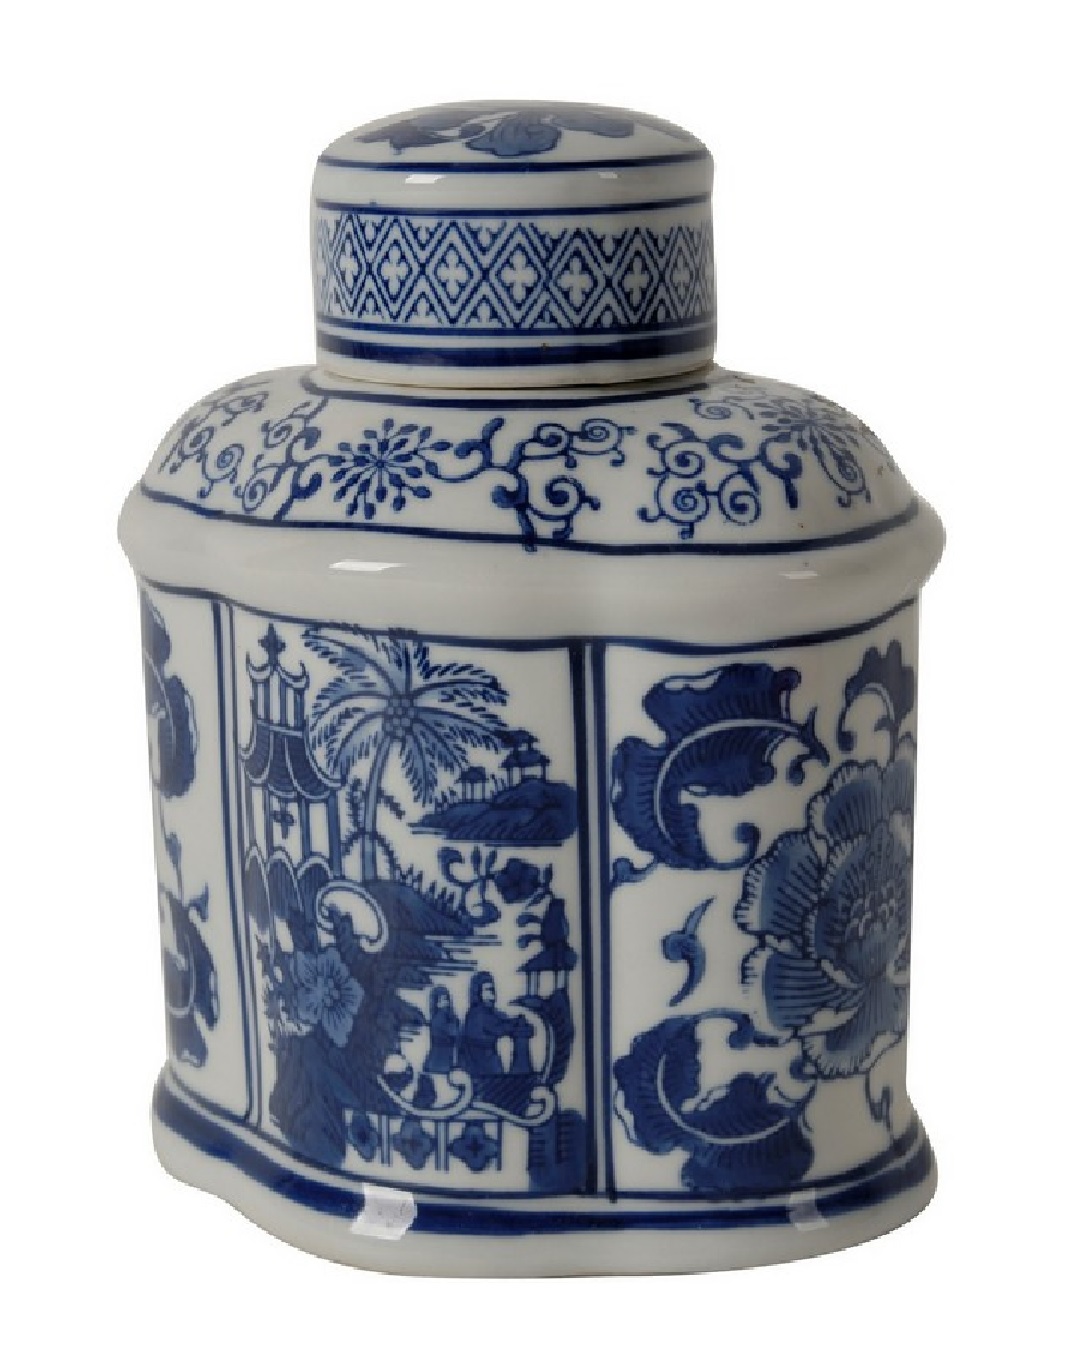 The Ren jar in blue and white porcelain